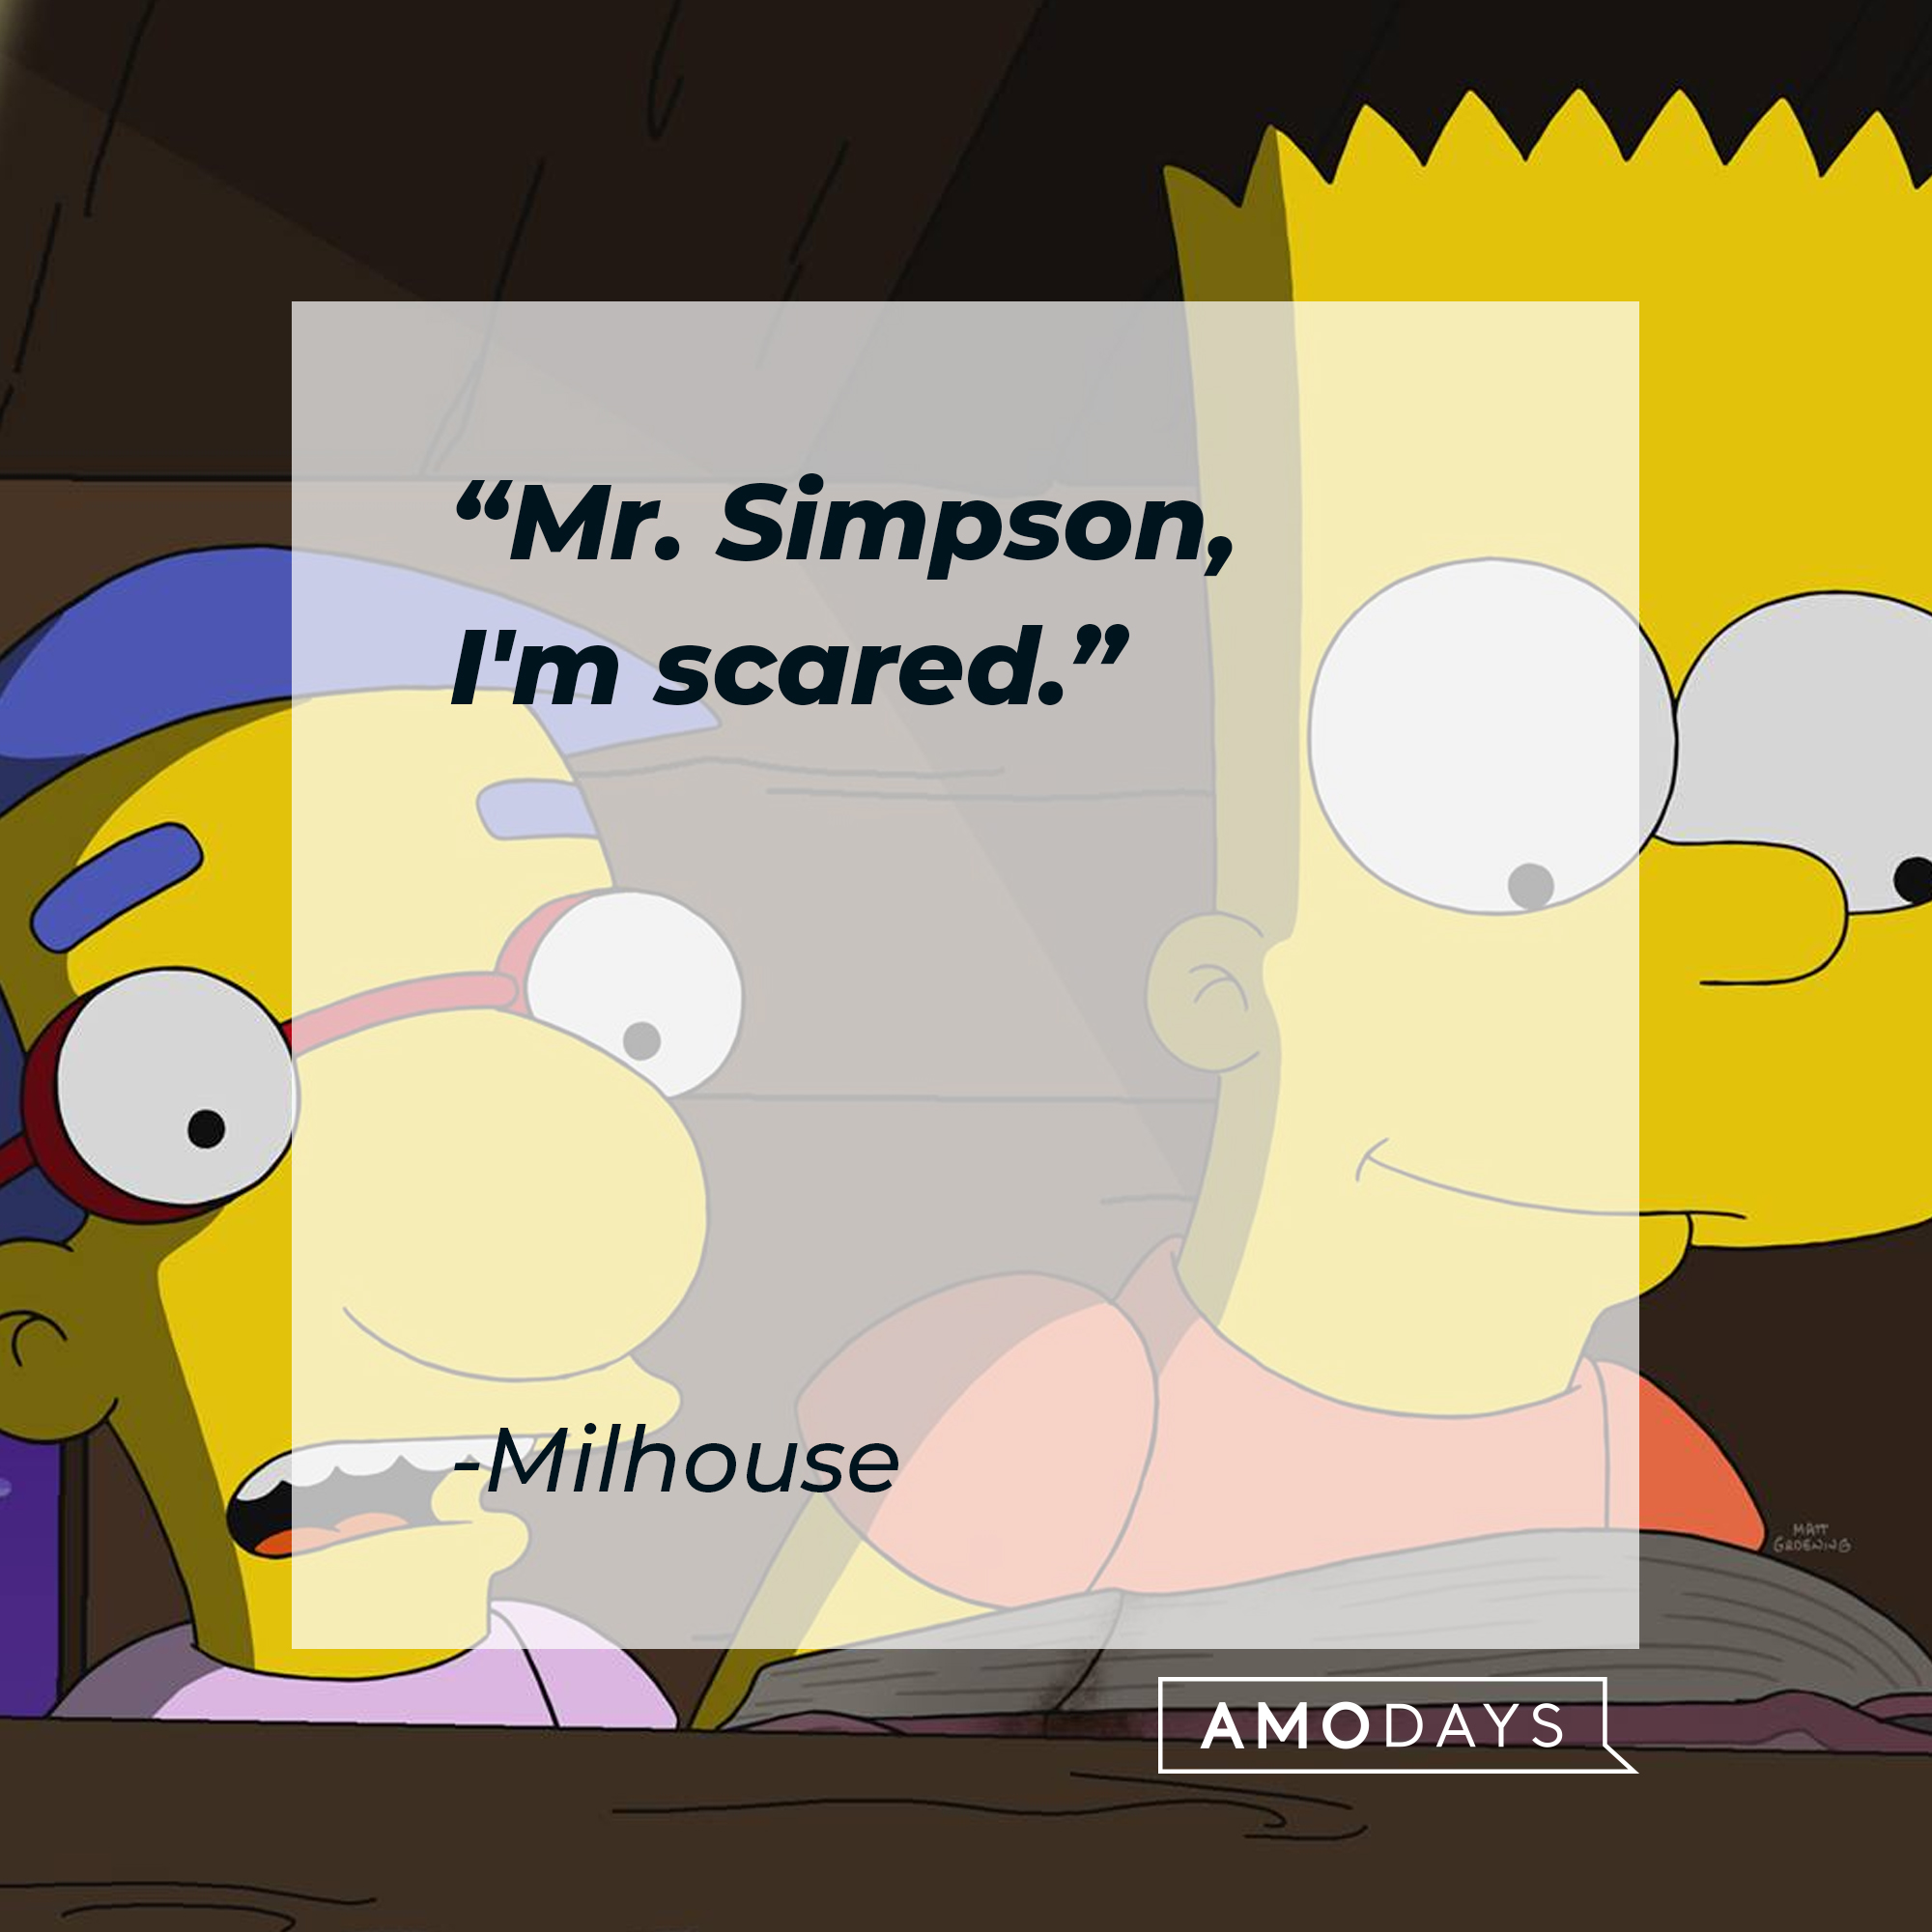 Bart Simpson, and Milhouse, with Milhouse's quote: ““Mr. Simpson, I'm scared.” | Source: facebook.com/TheSimpsons